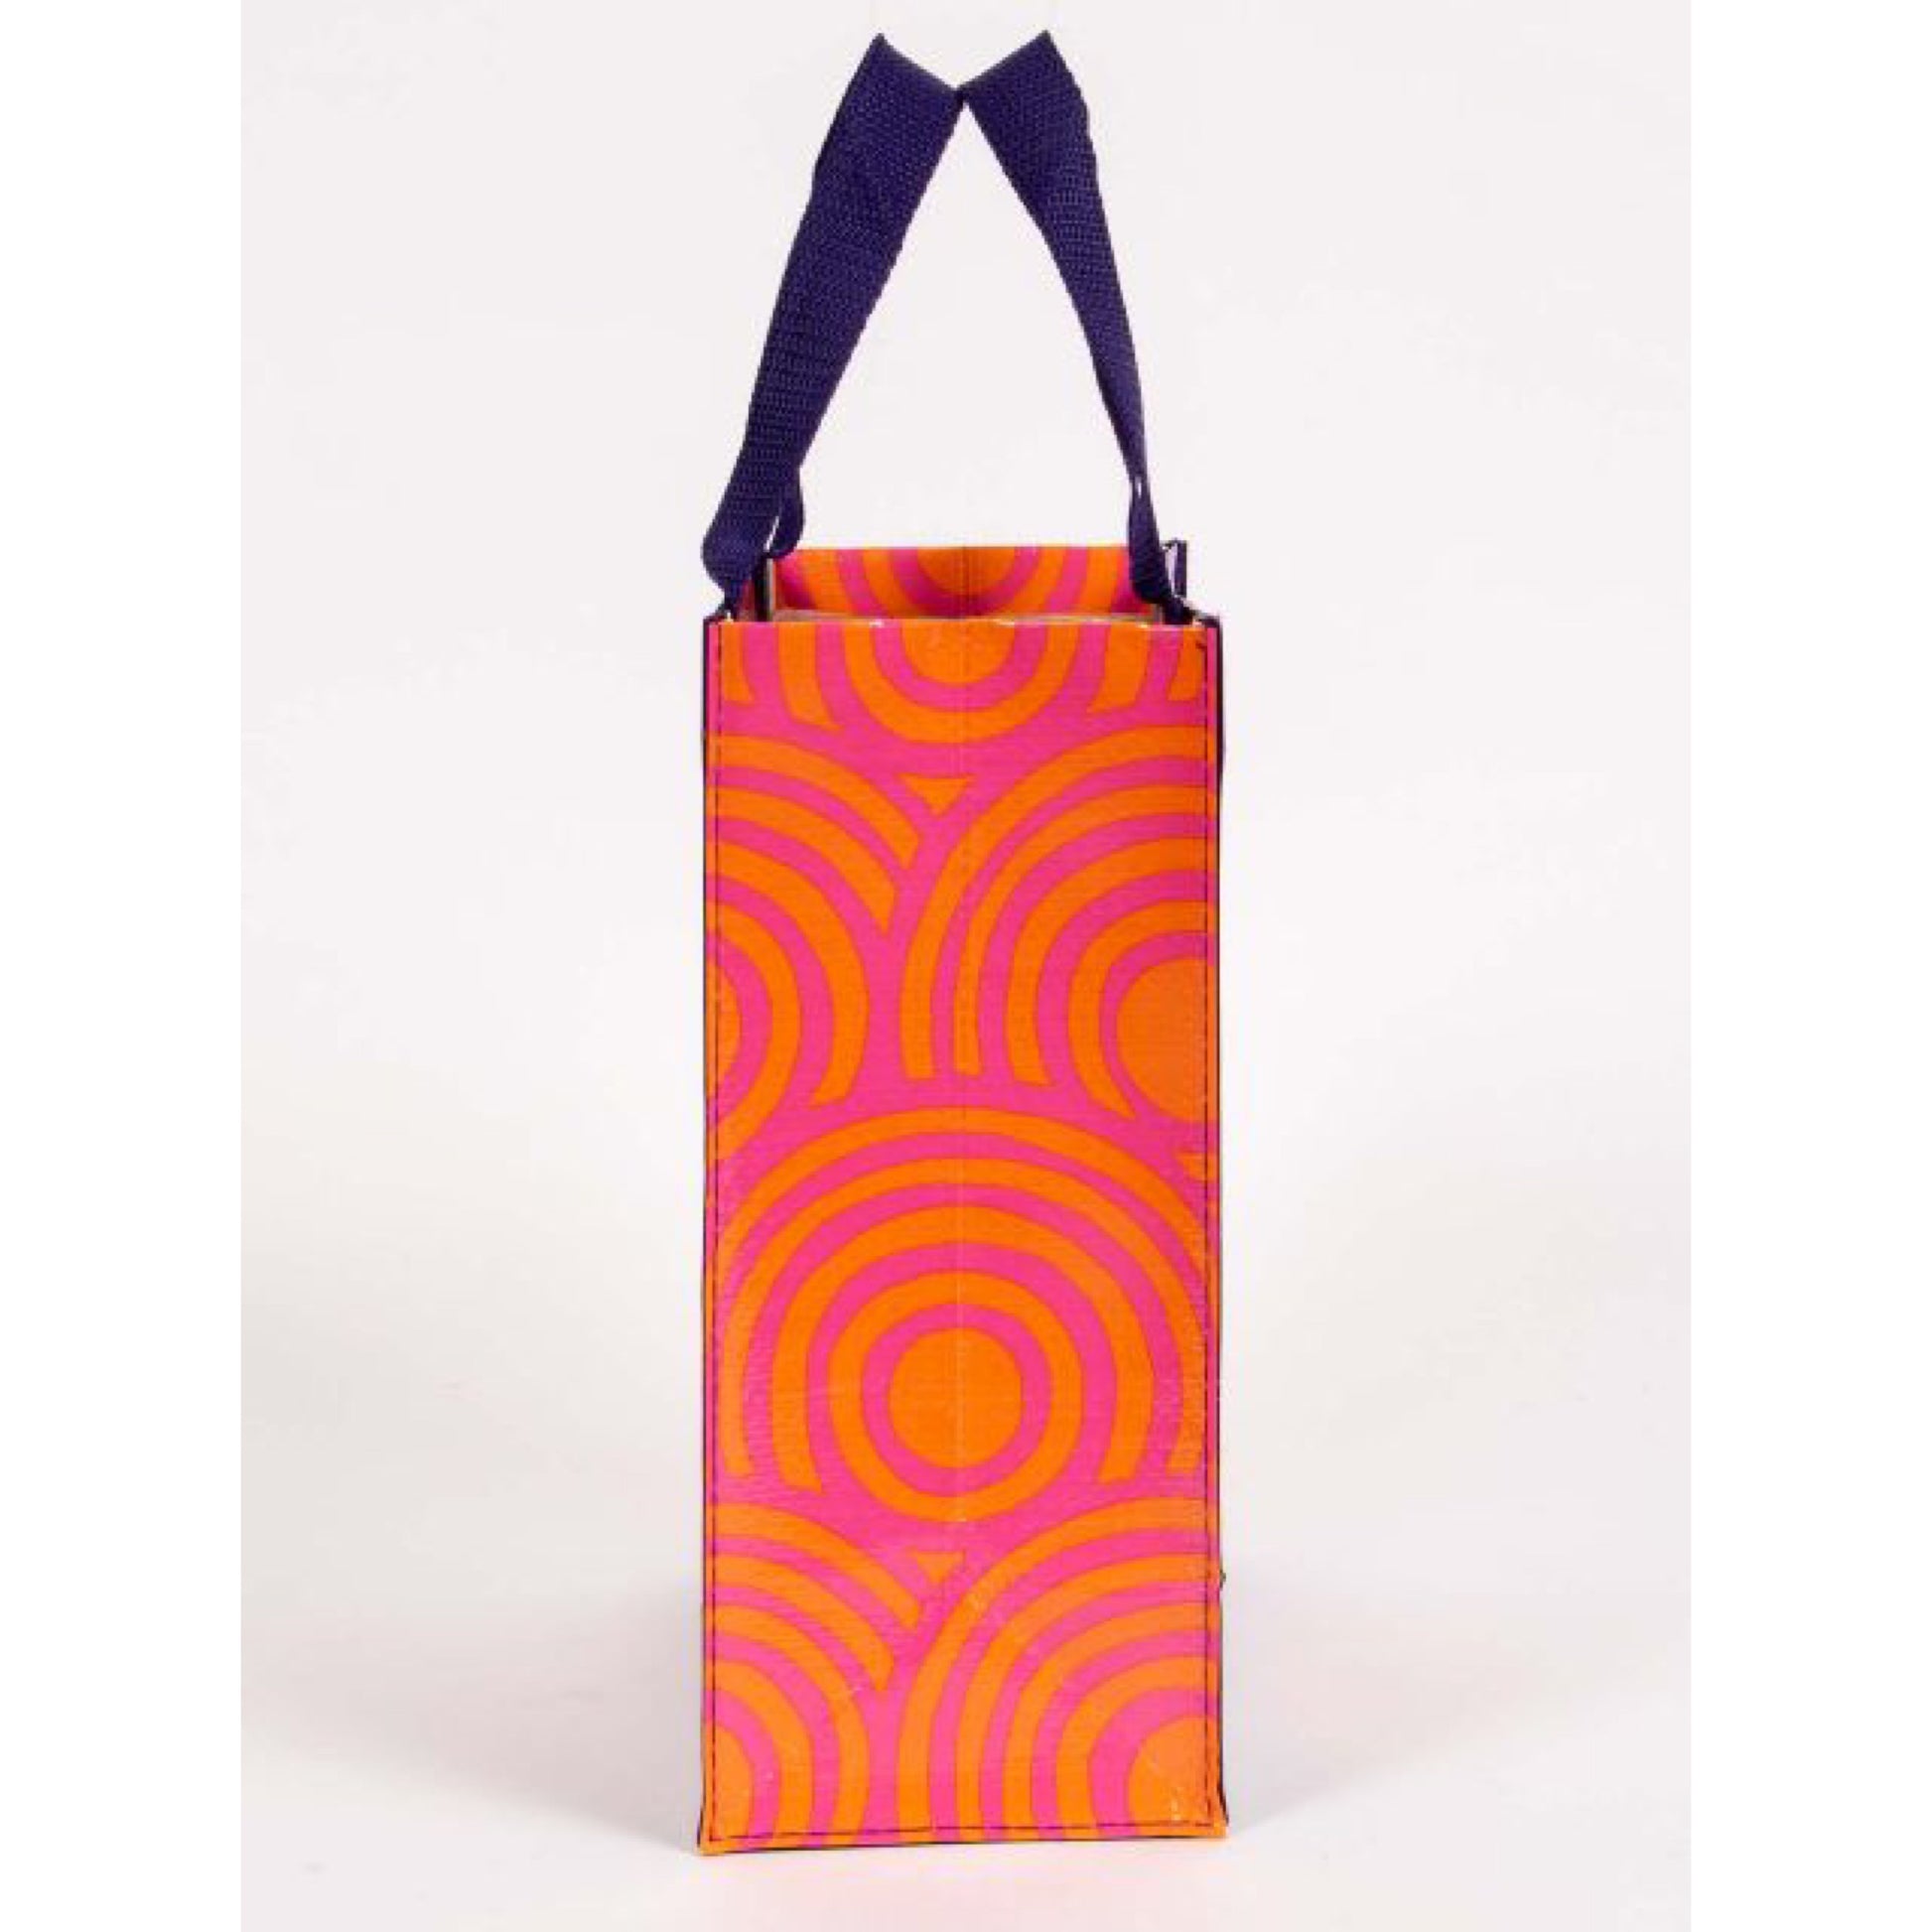 Blue Q munchies lunch bag with a orange and pink circled pattern on the side.